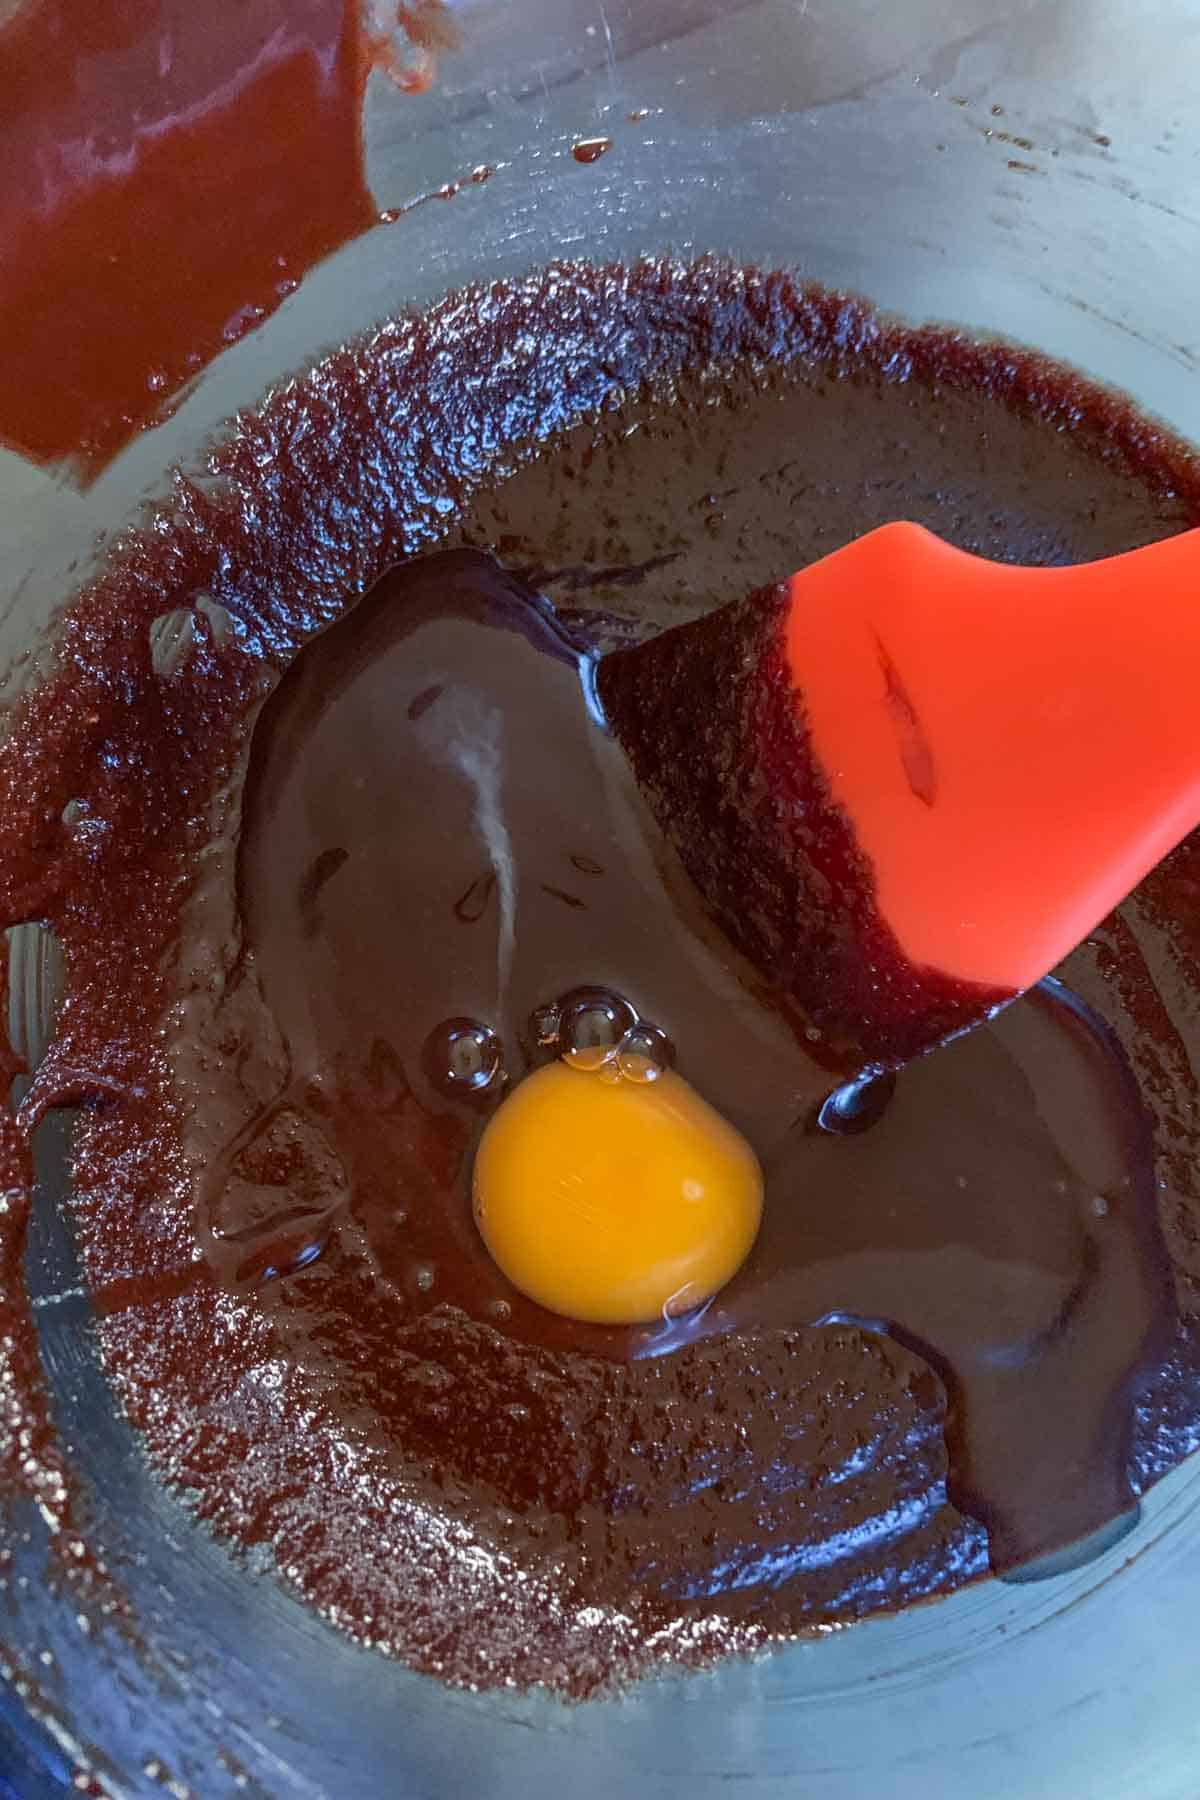 Adding egg to chocolate mixture for brownies.